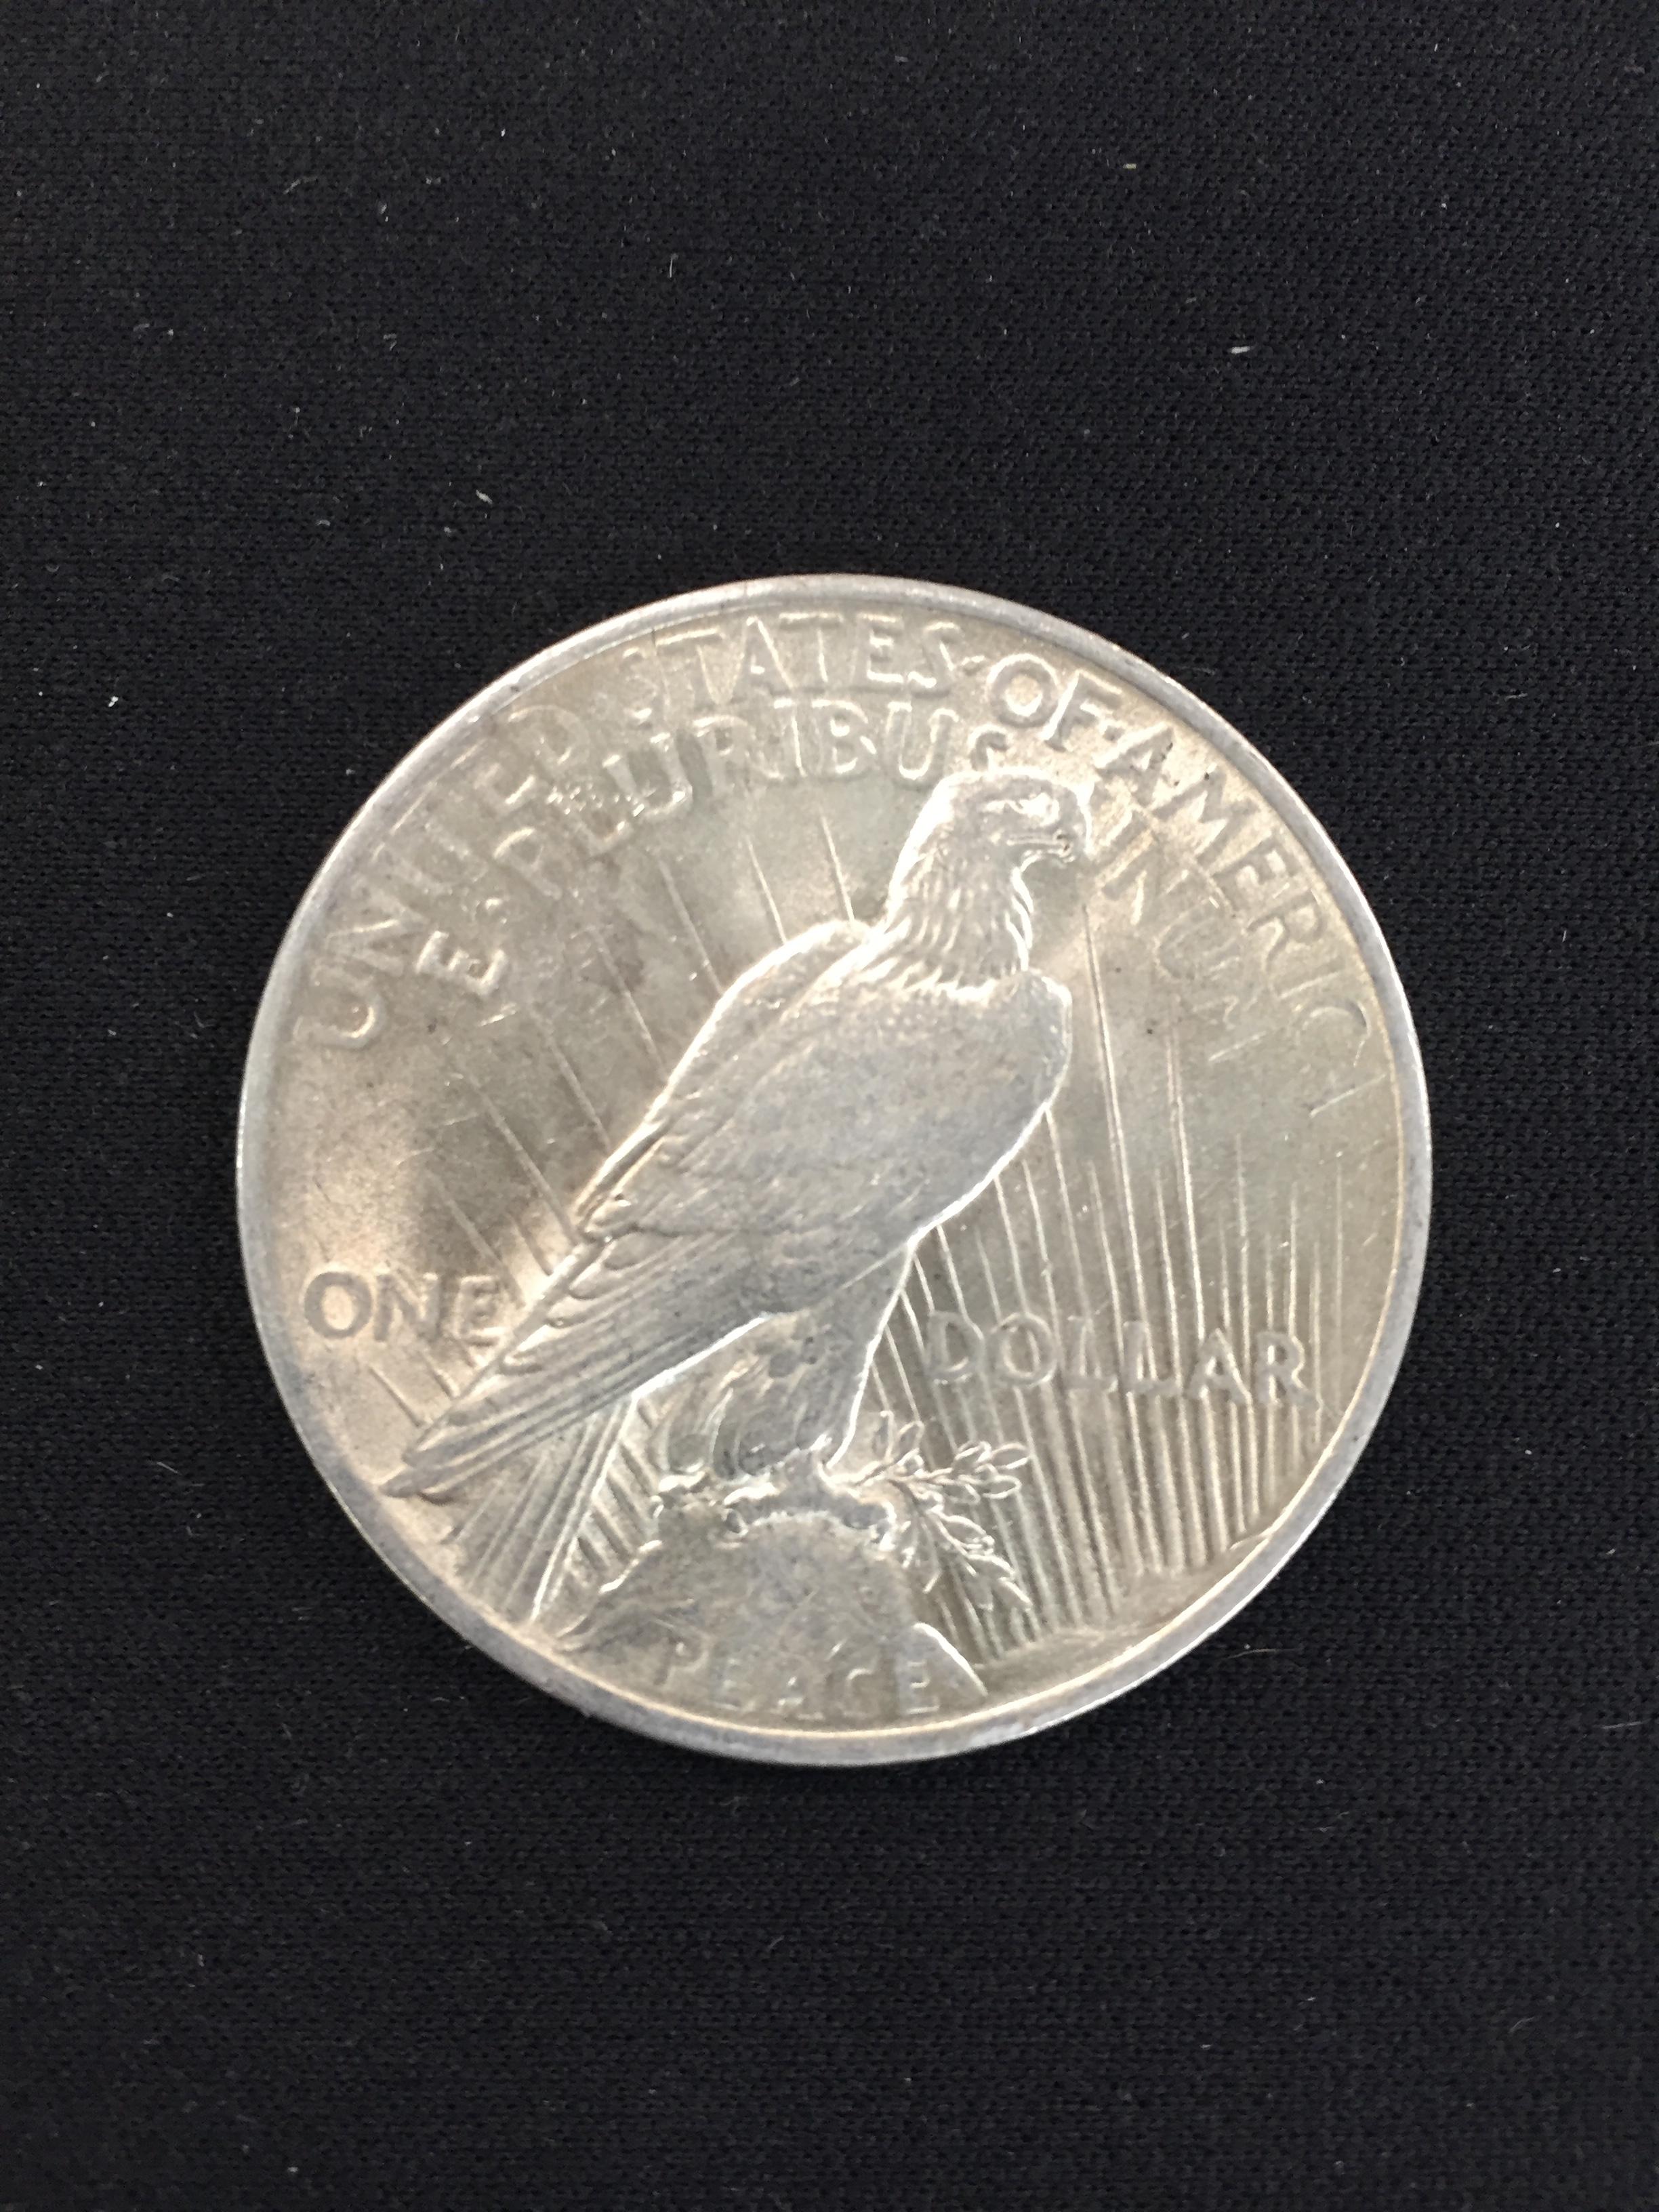 1922-United States Peace Silver Dollar - 90% Silver Coin